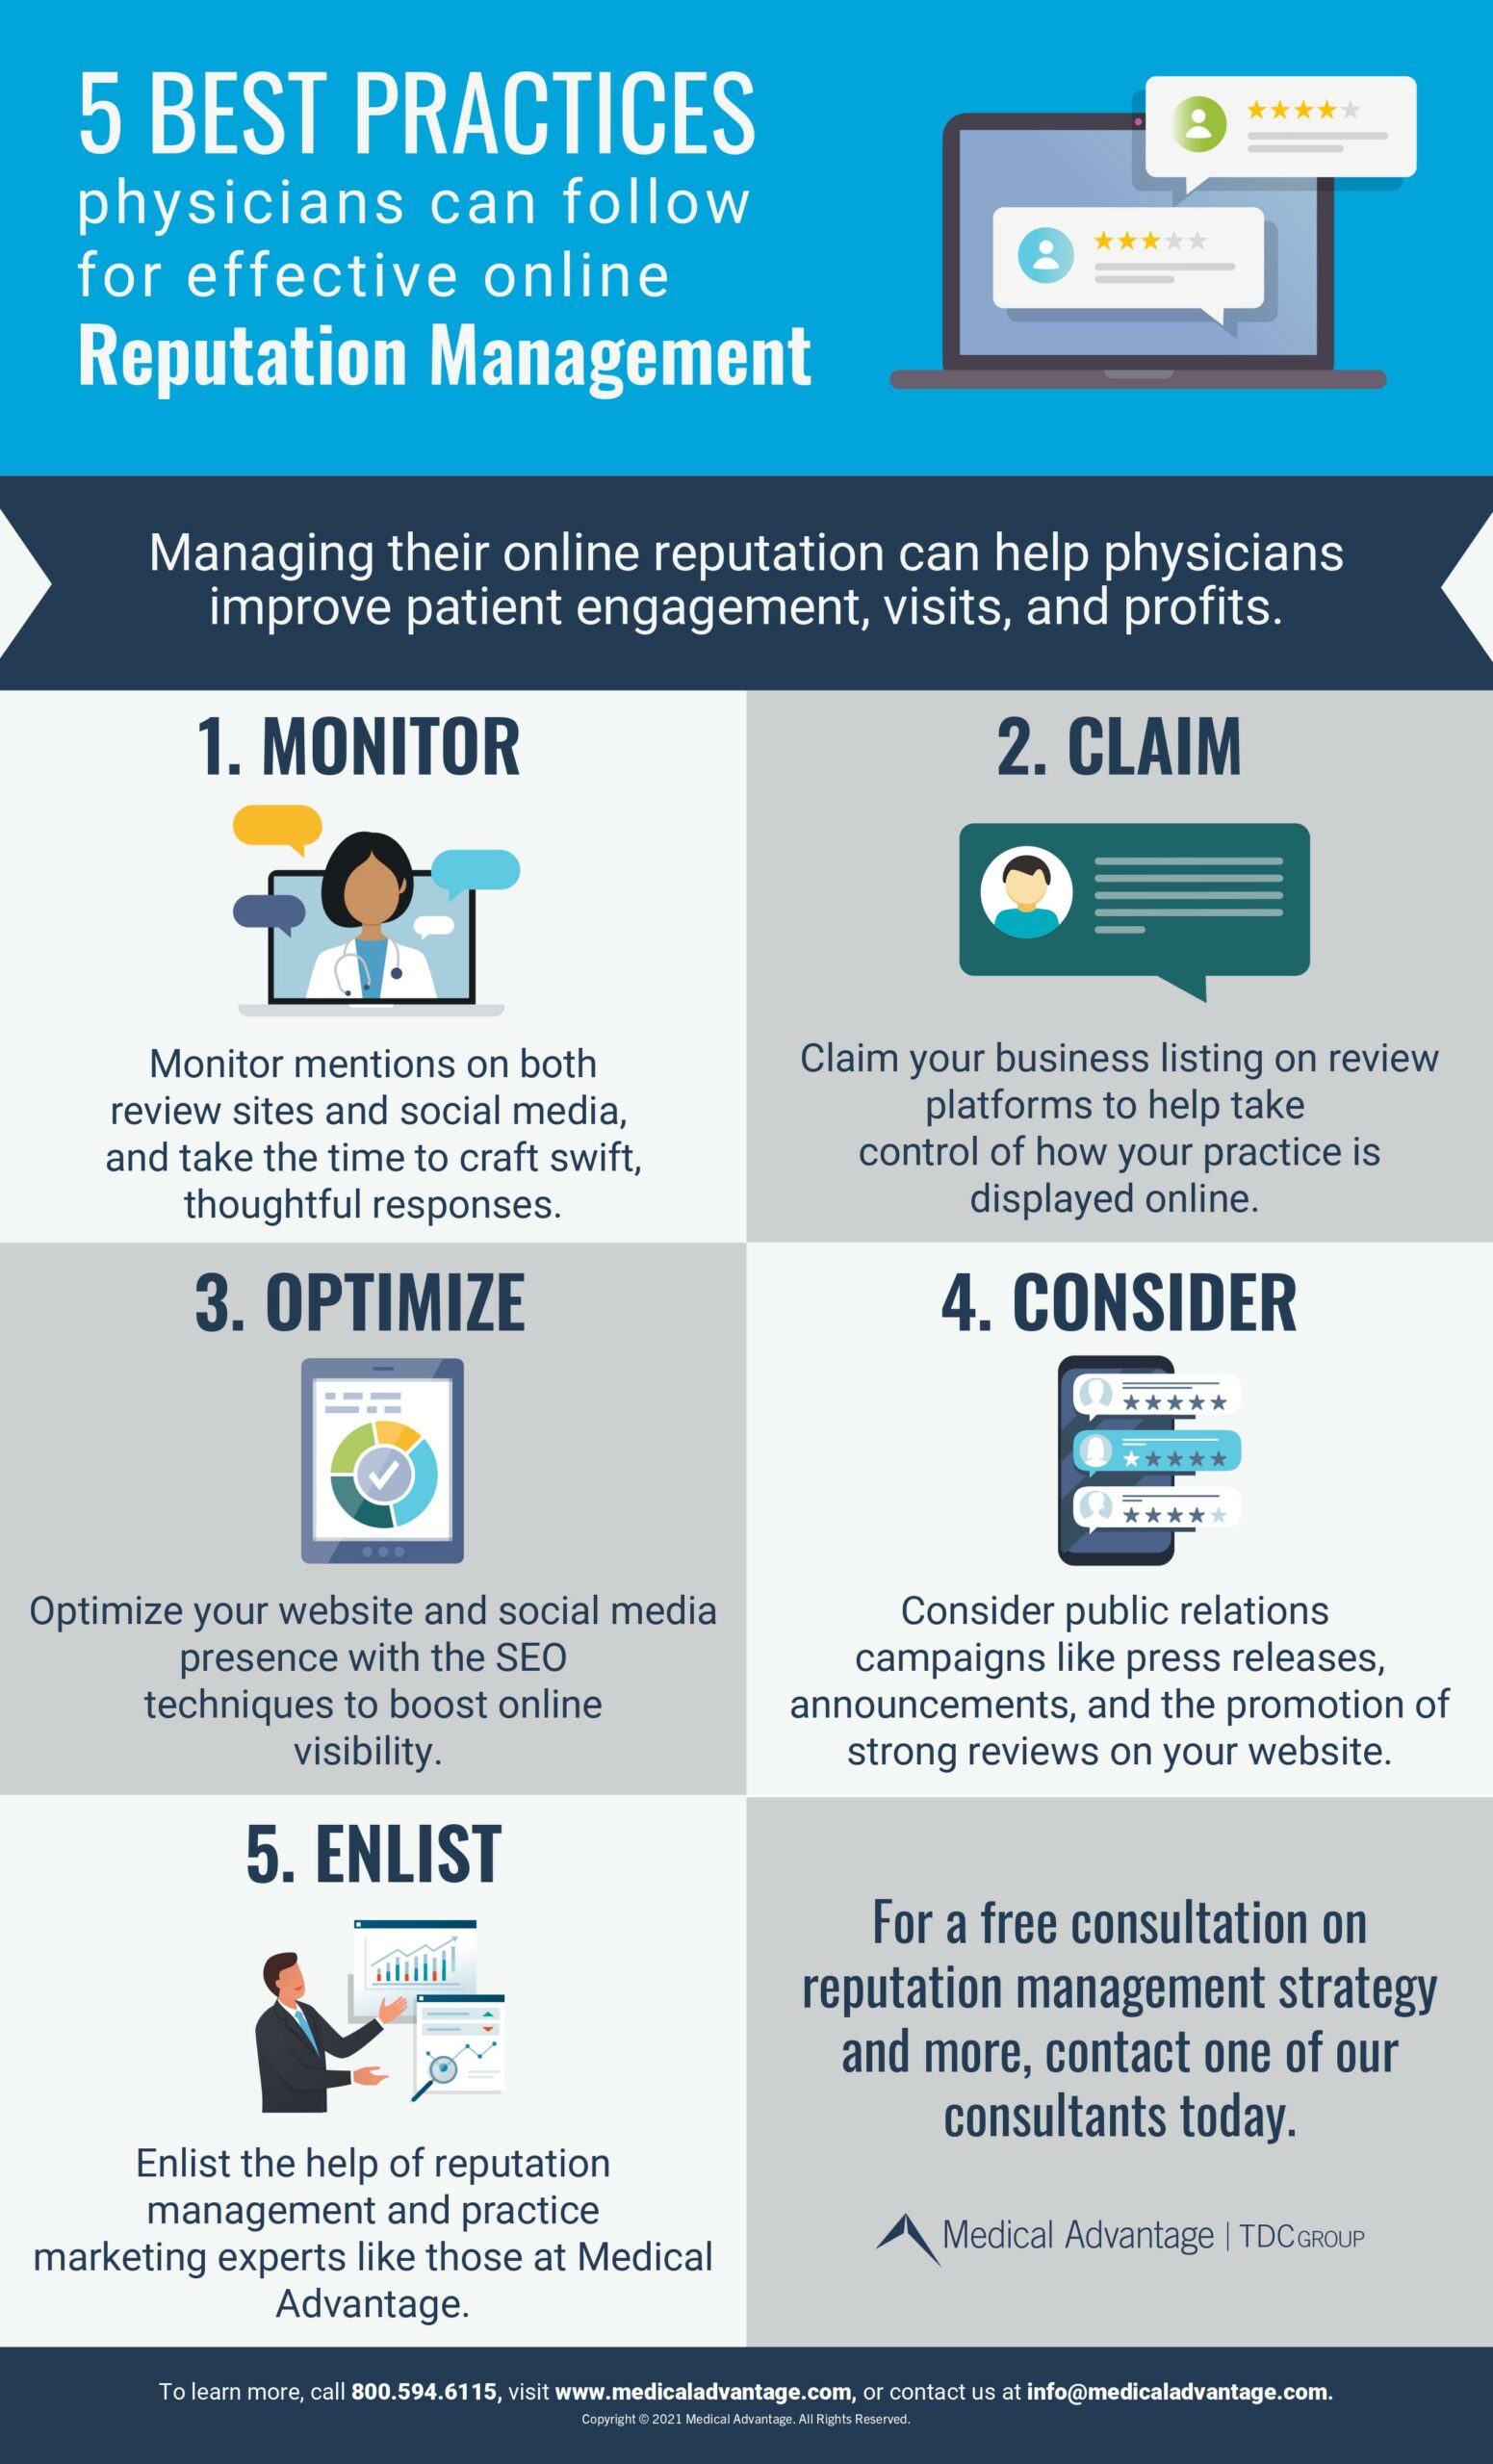 5 Best Practices Physicians can Follow for Effective Online Reputation Management